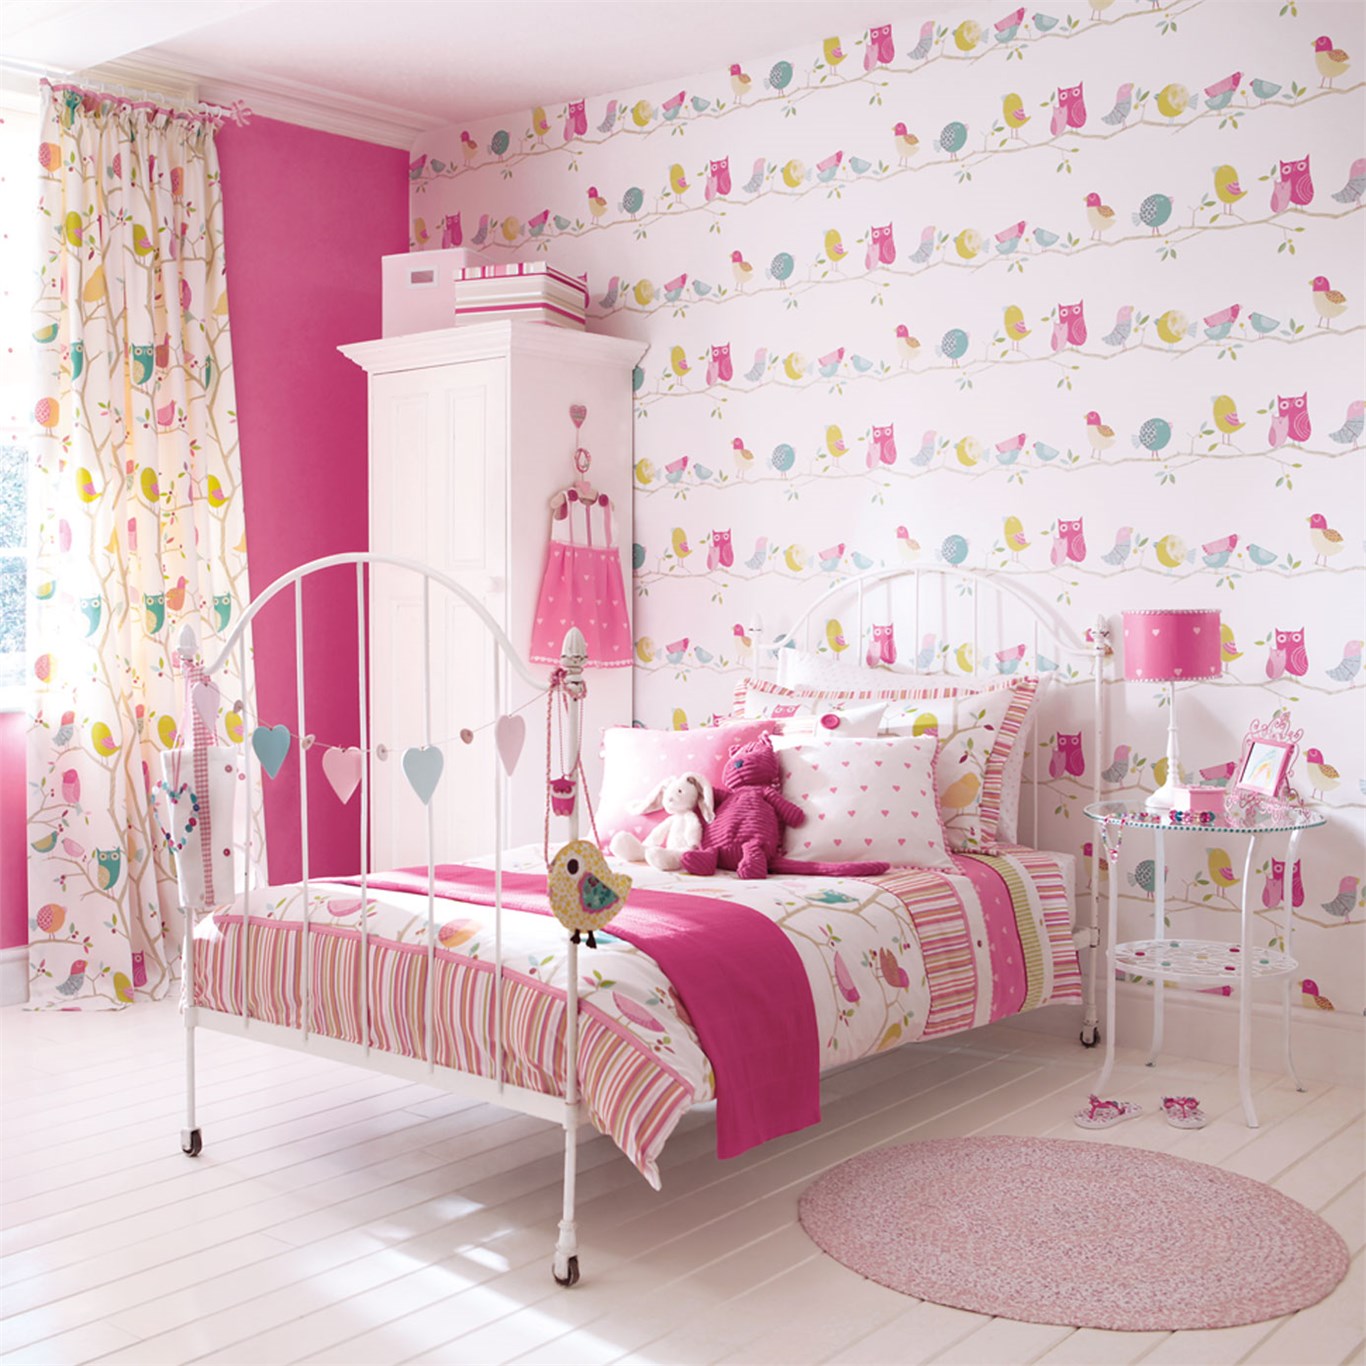 What A Hoot, A Wallpaper By Harlequin, Part Of The - Harlequin What A Hoot - HD Wallpaper 